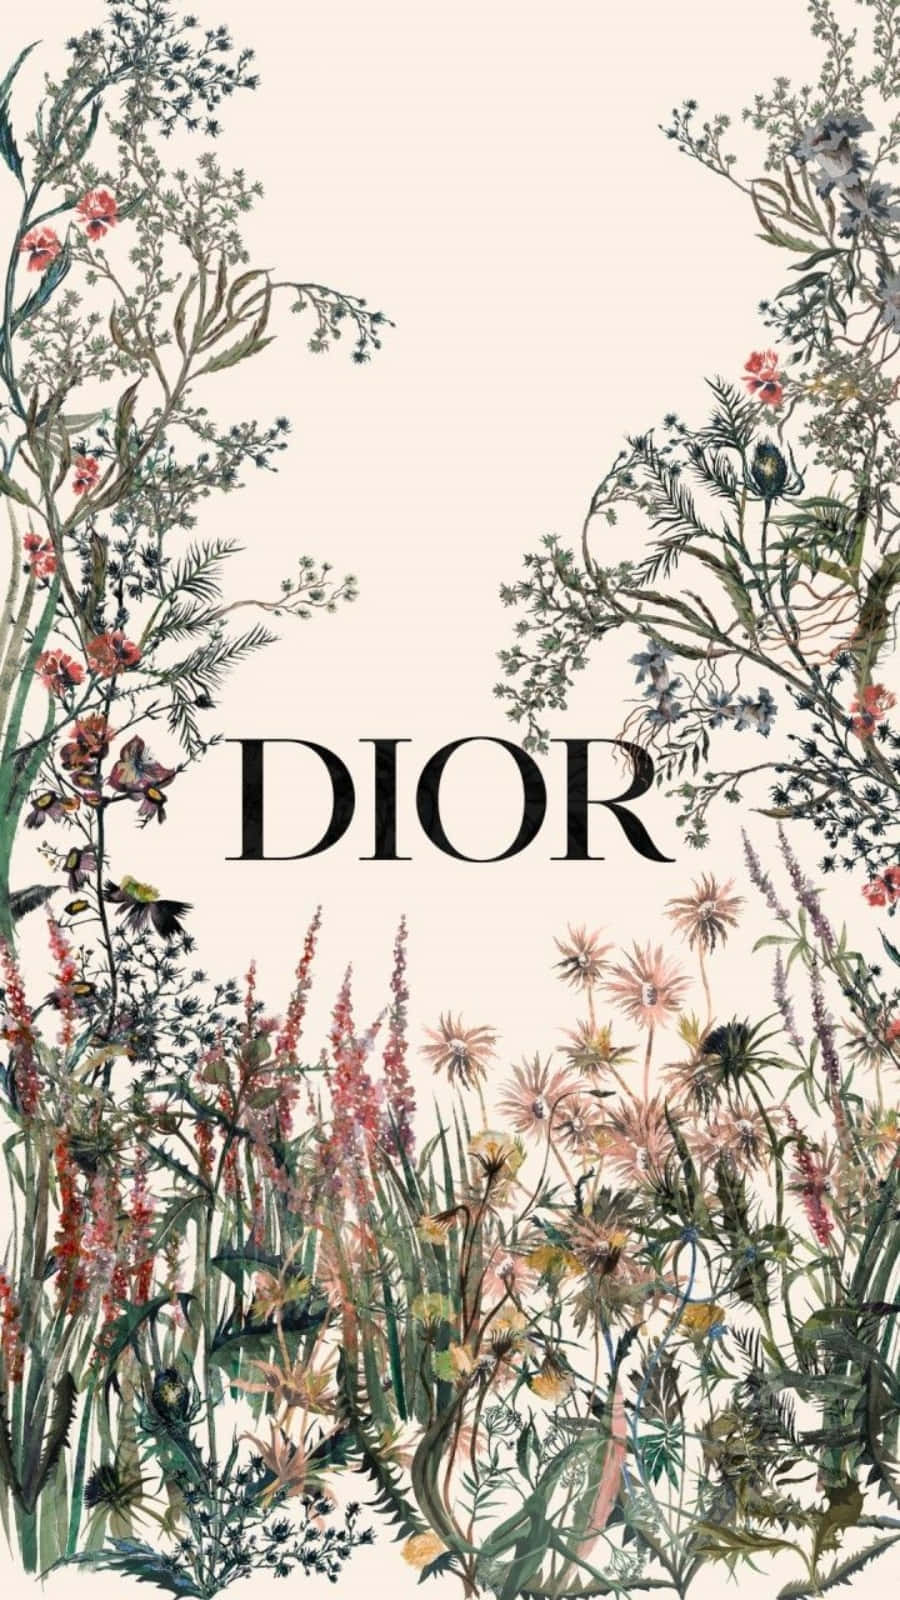 Elevate your ensembles with a touch of luxury with this stunning handbag from the House of Dior!